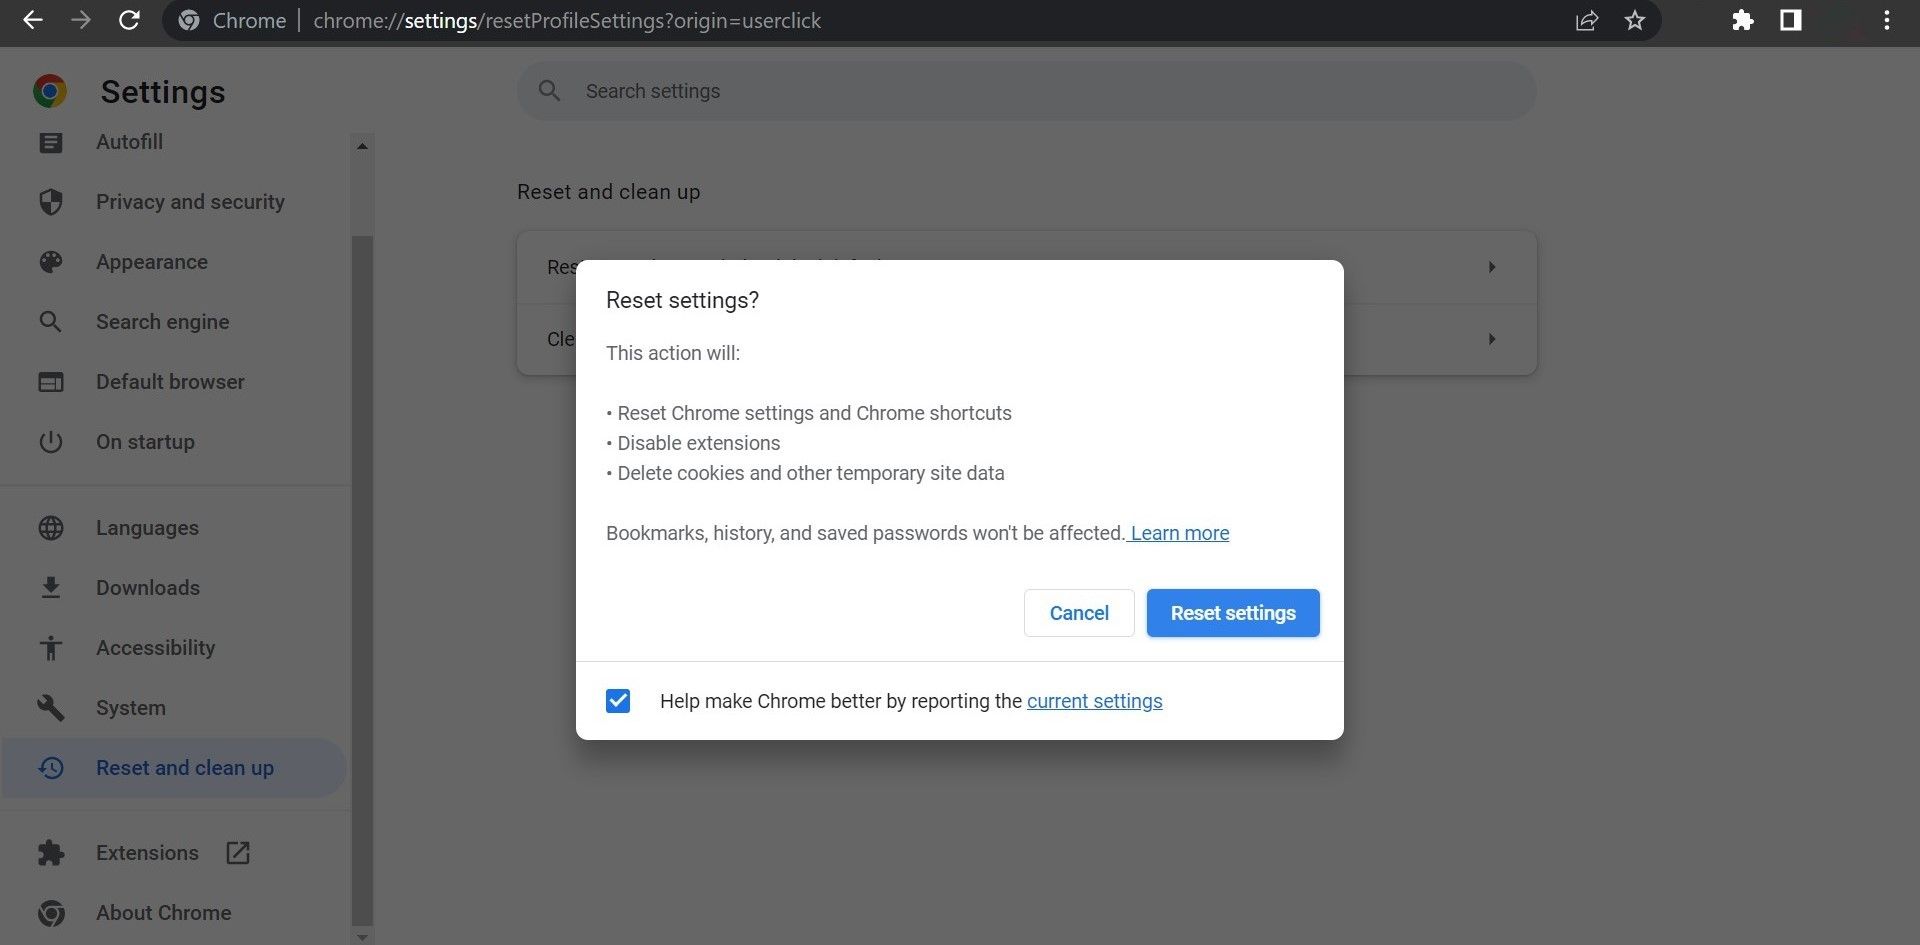 Clicking the Reset button to restore settings to their original defaults in Chrome settings